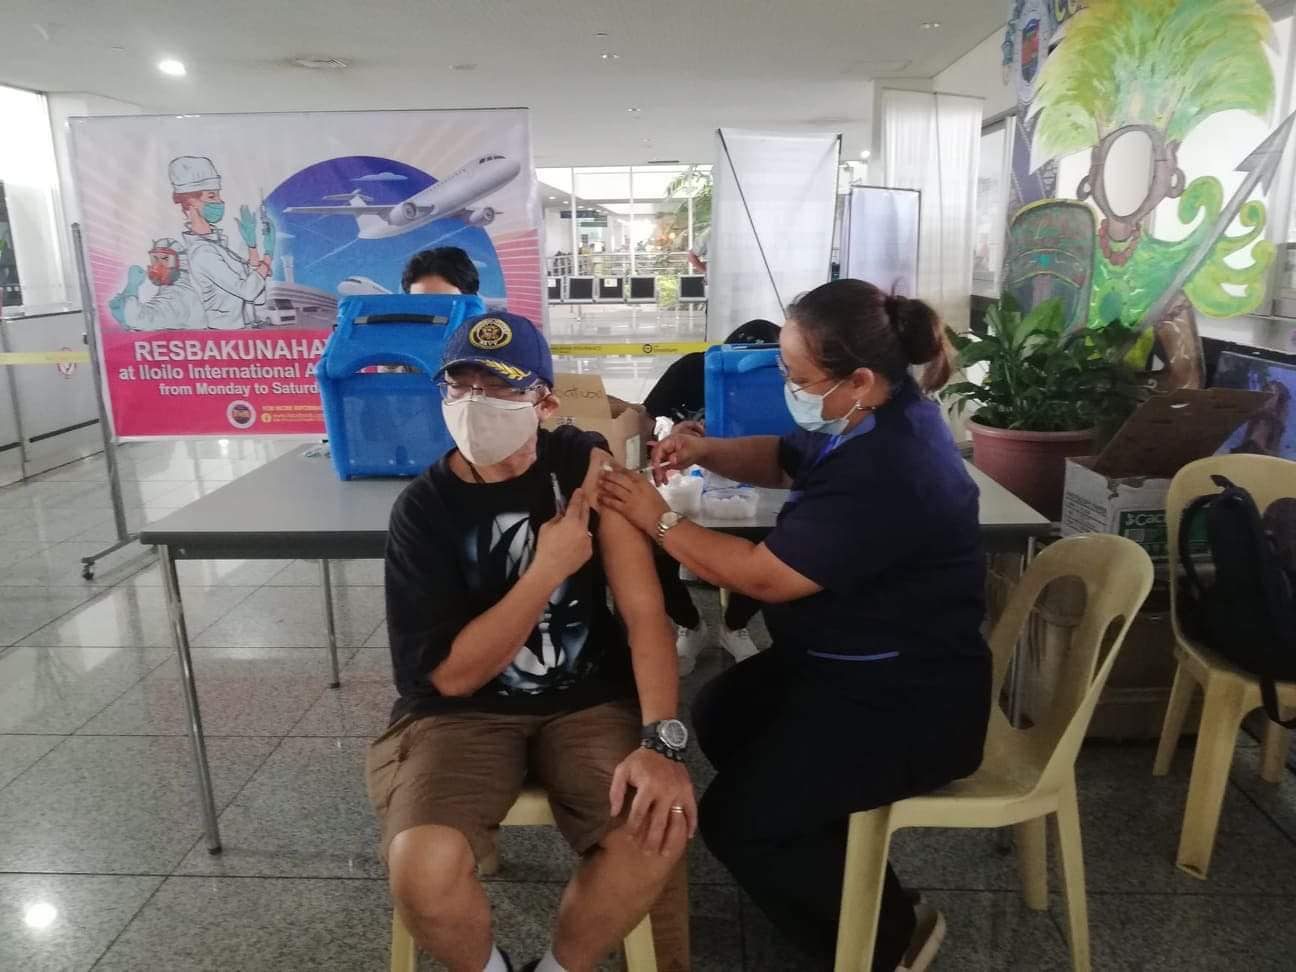 Western Visayas will not follow Cebu in dropping outdoors mask use